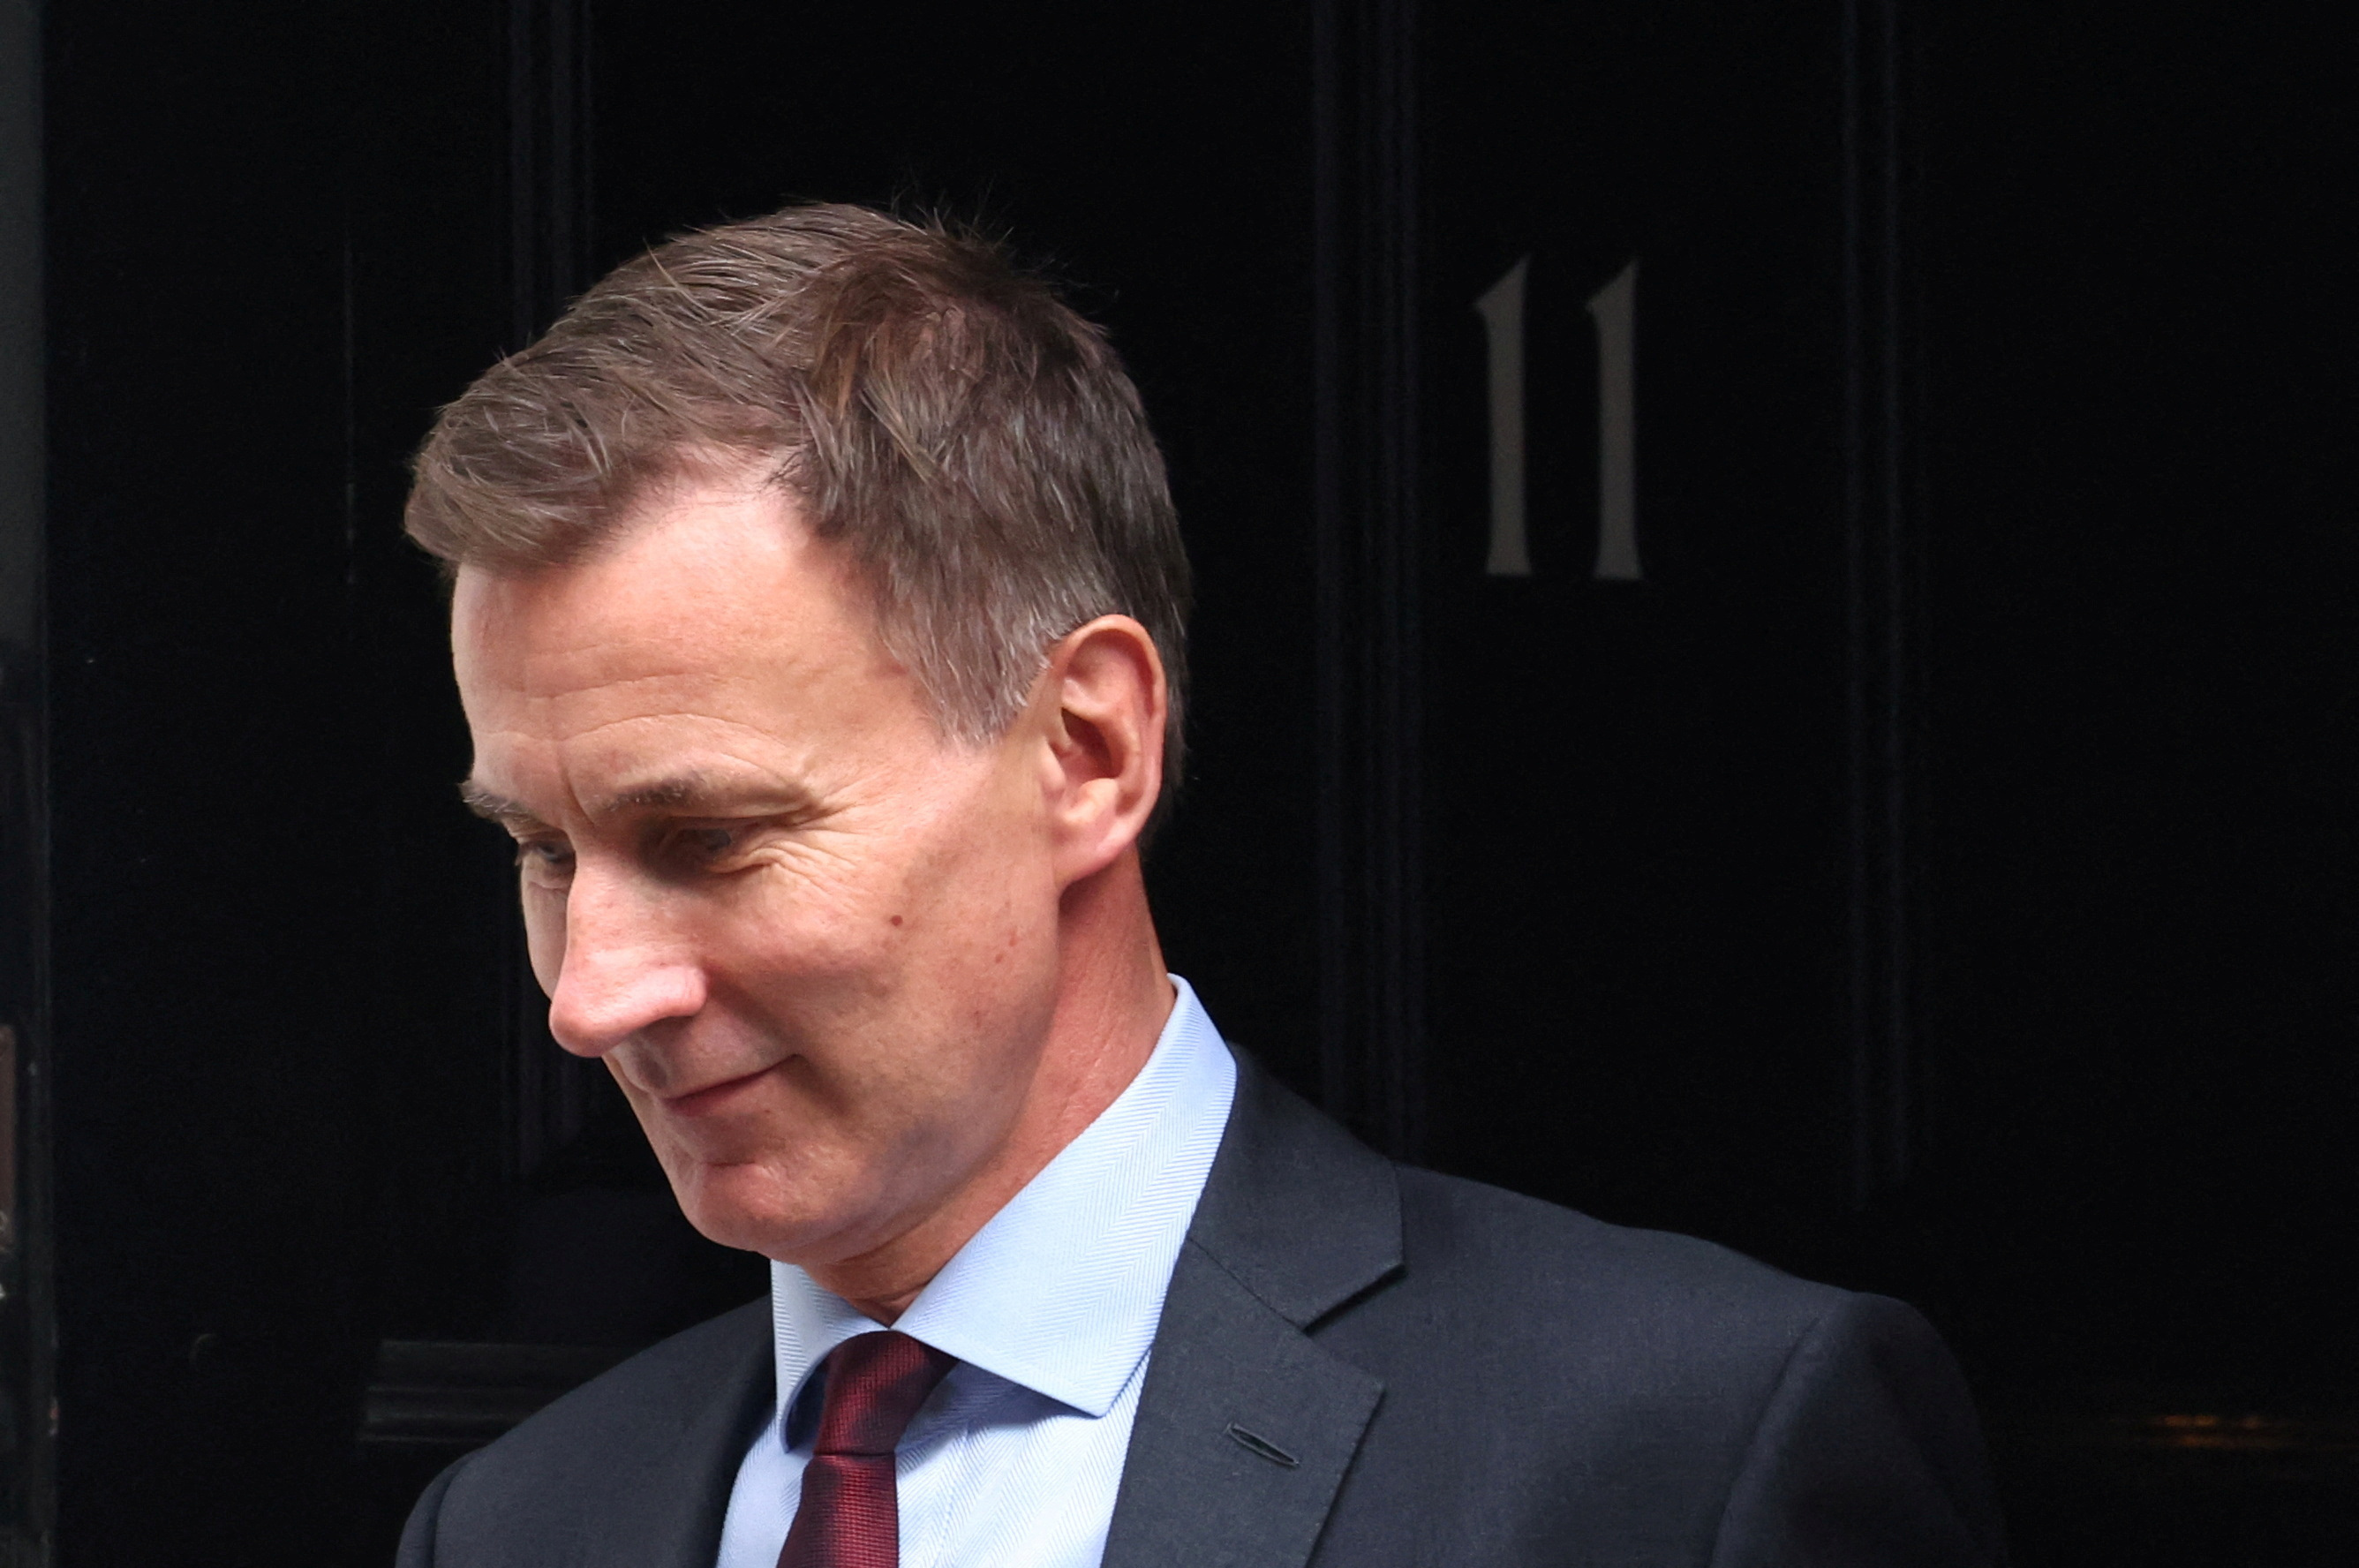 British Chancellor of the Exchequer Jeremy Hunt leaves Downing Street in London